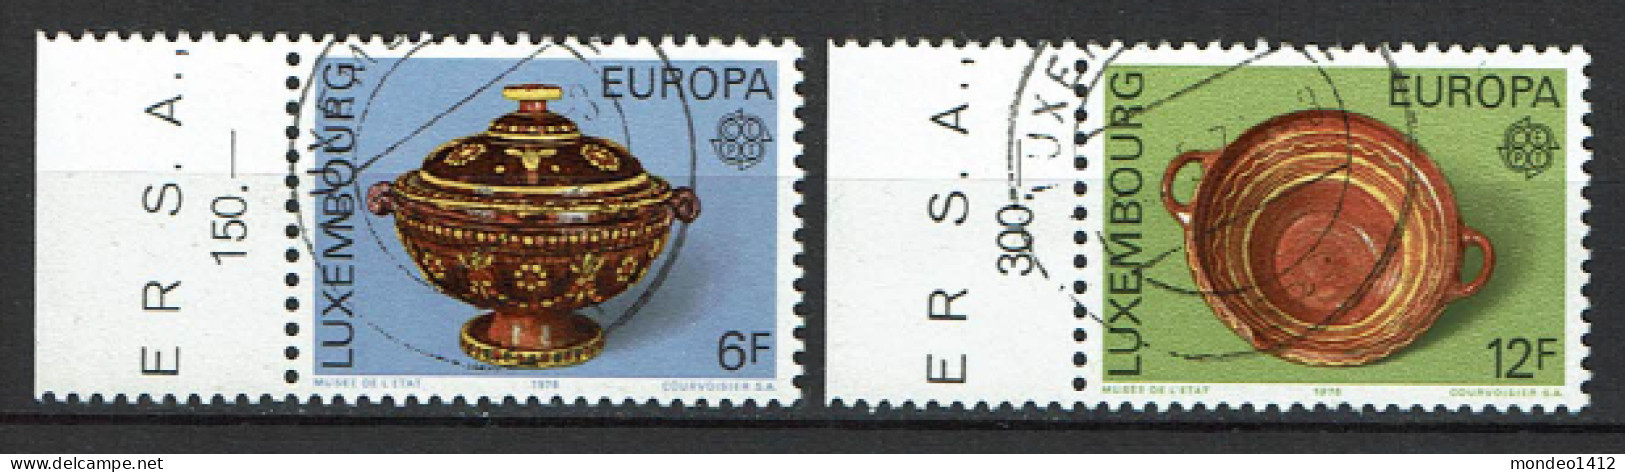 Luxembourg 1975 - YT 878/879 - EUROPA Stamps - Handicrafts, Oeuvres Artisanales - Usati